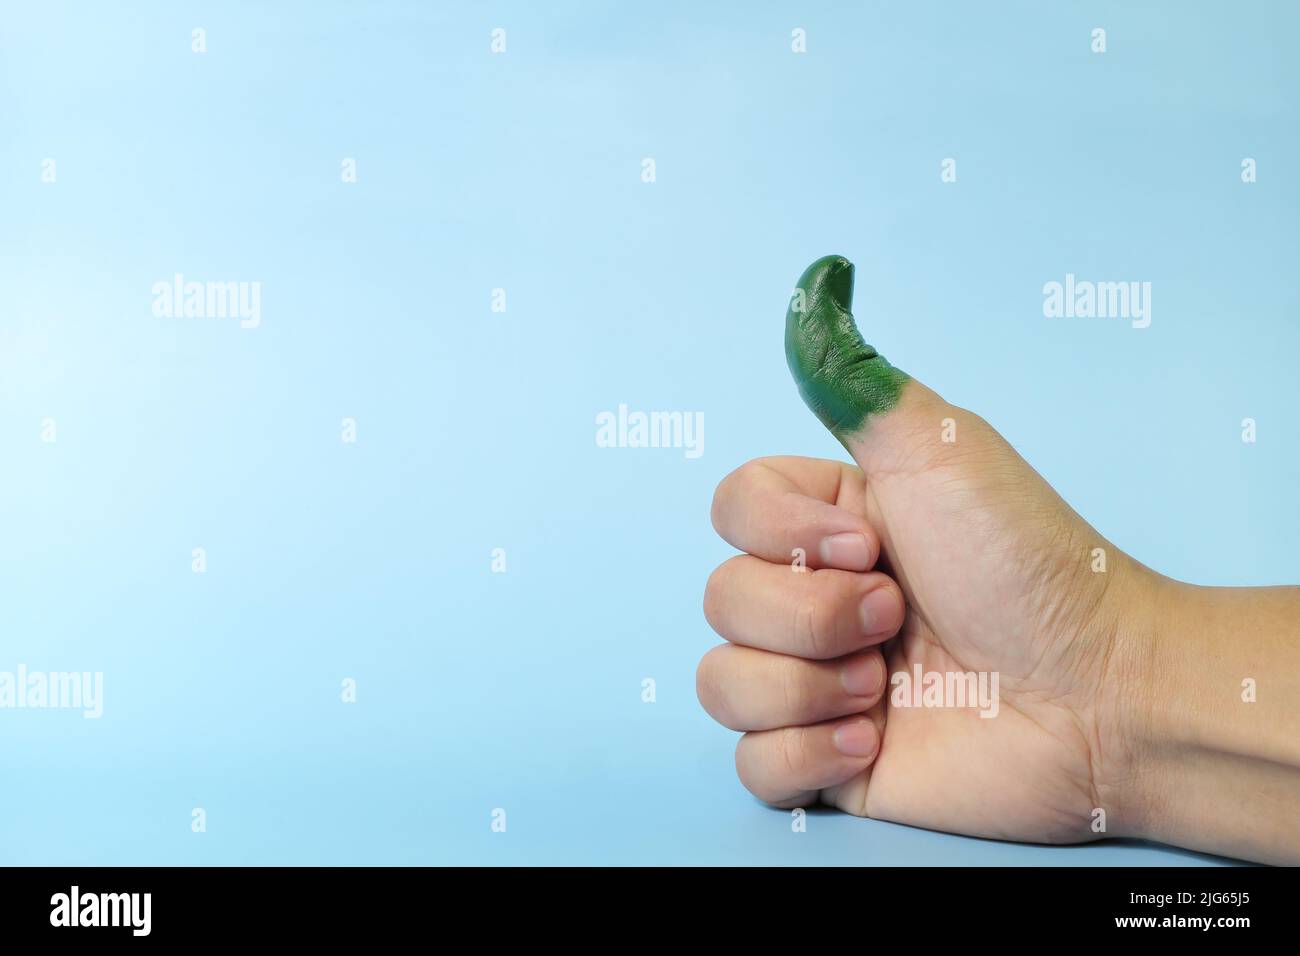 Green thumb and environmentalist concept. Human thumb up painted with color green. Stock Photo